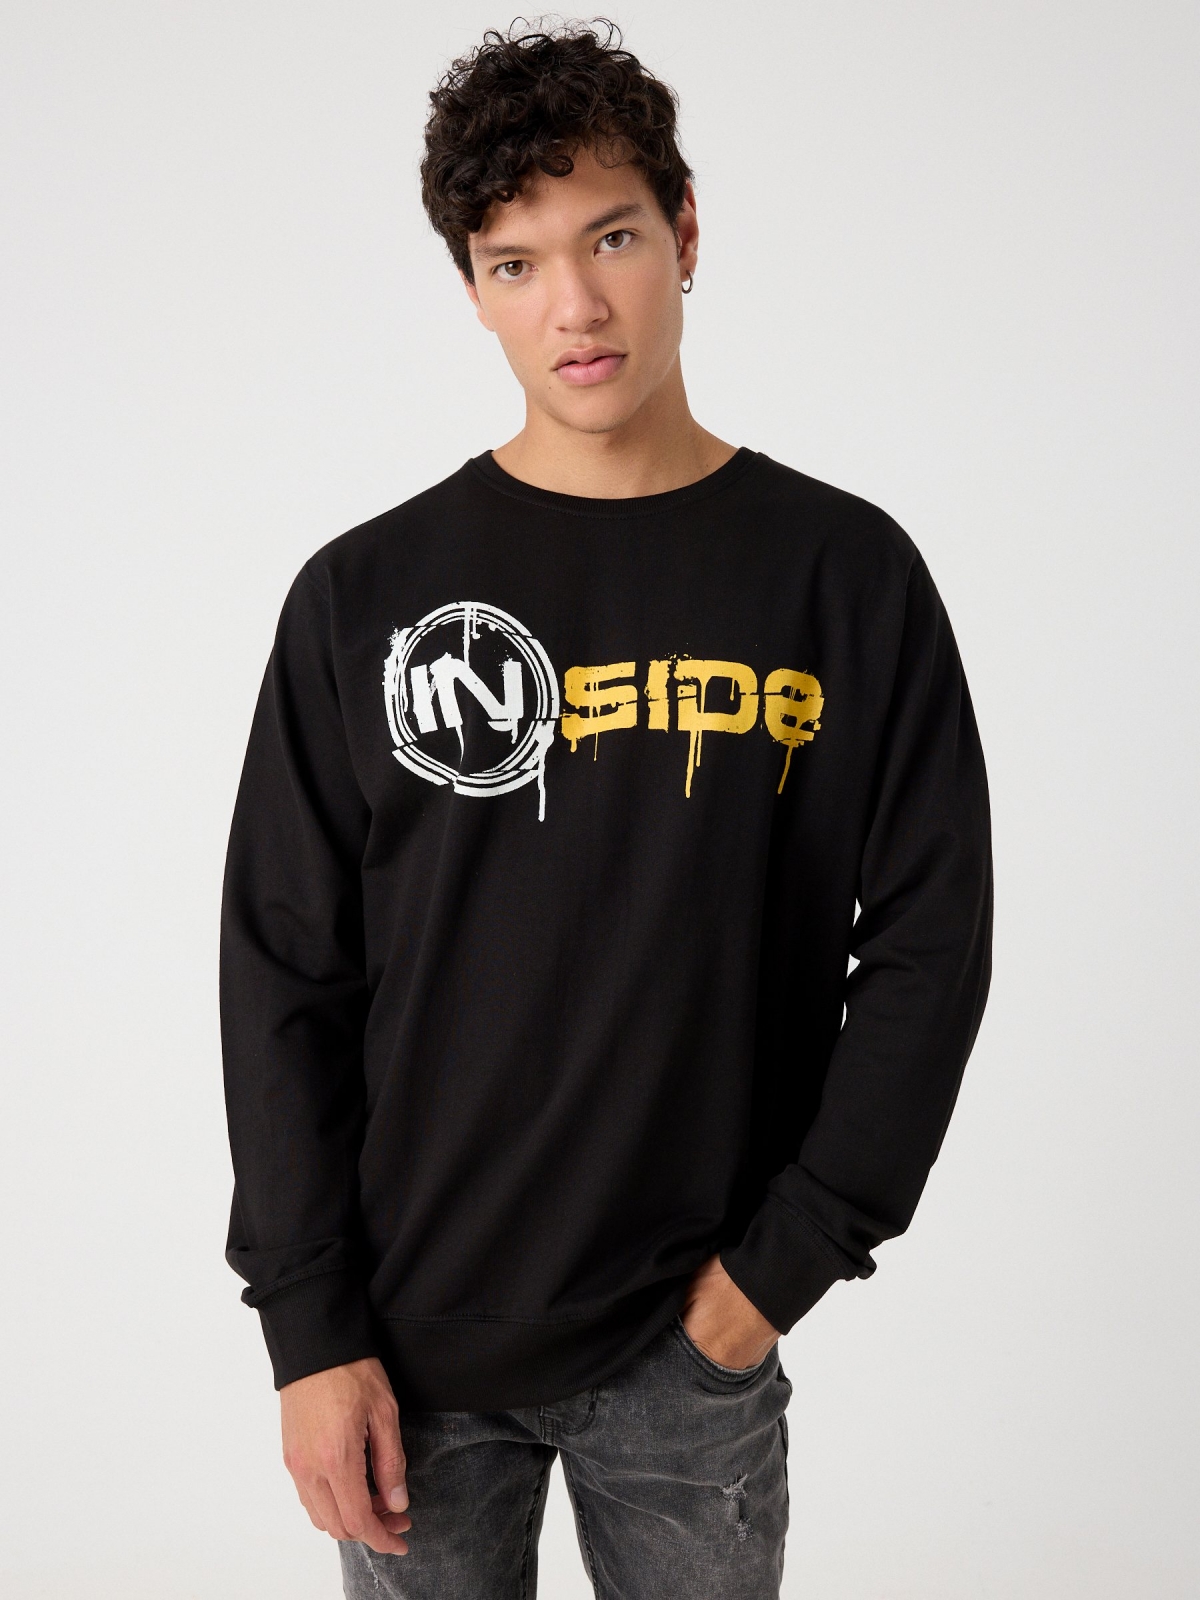 Hoodless sweatshirt with logo black middle front view